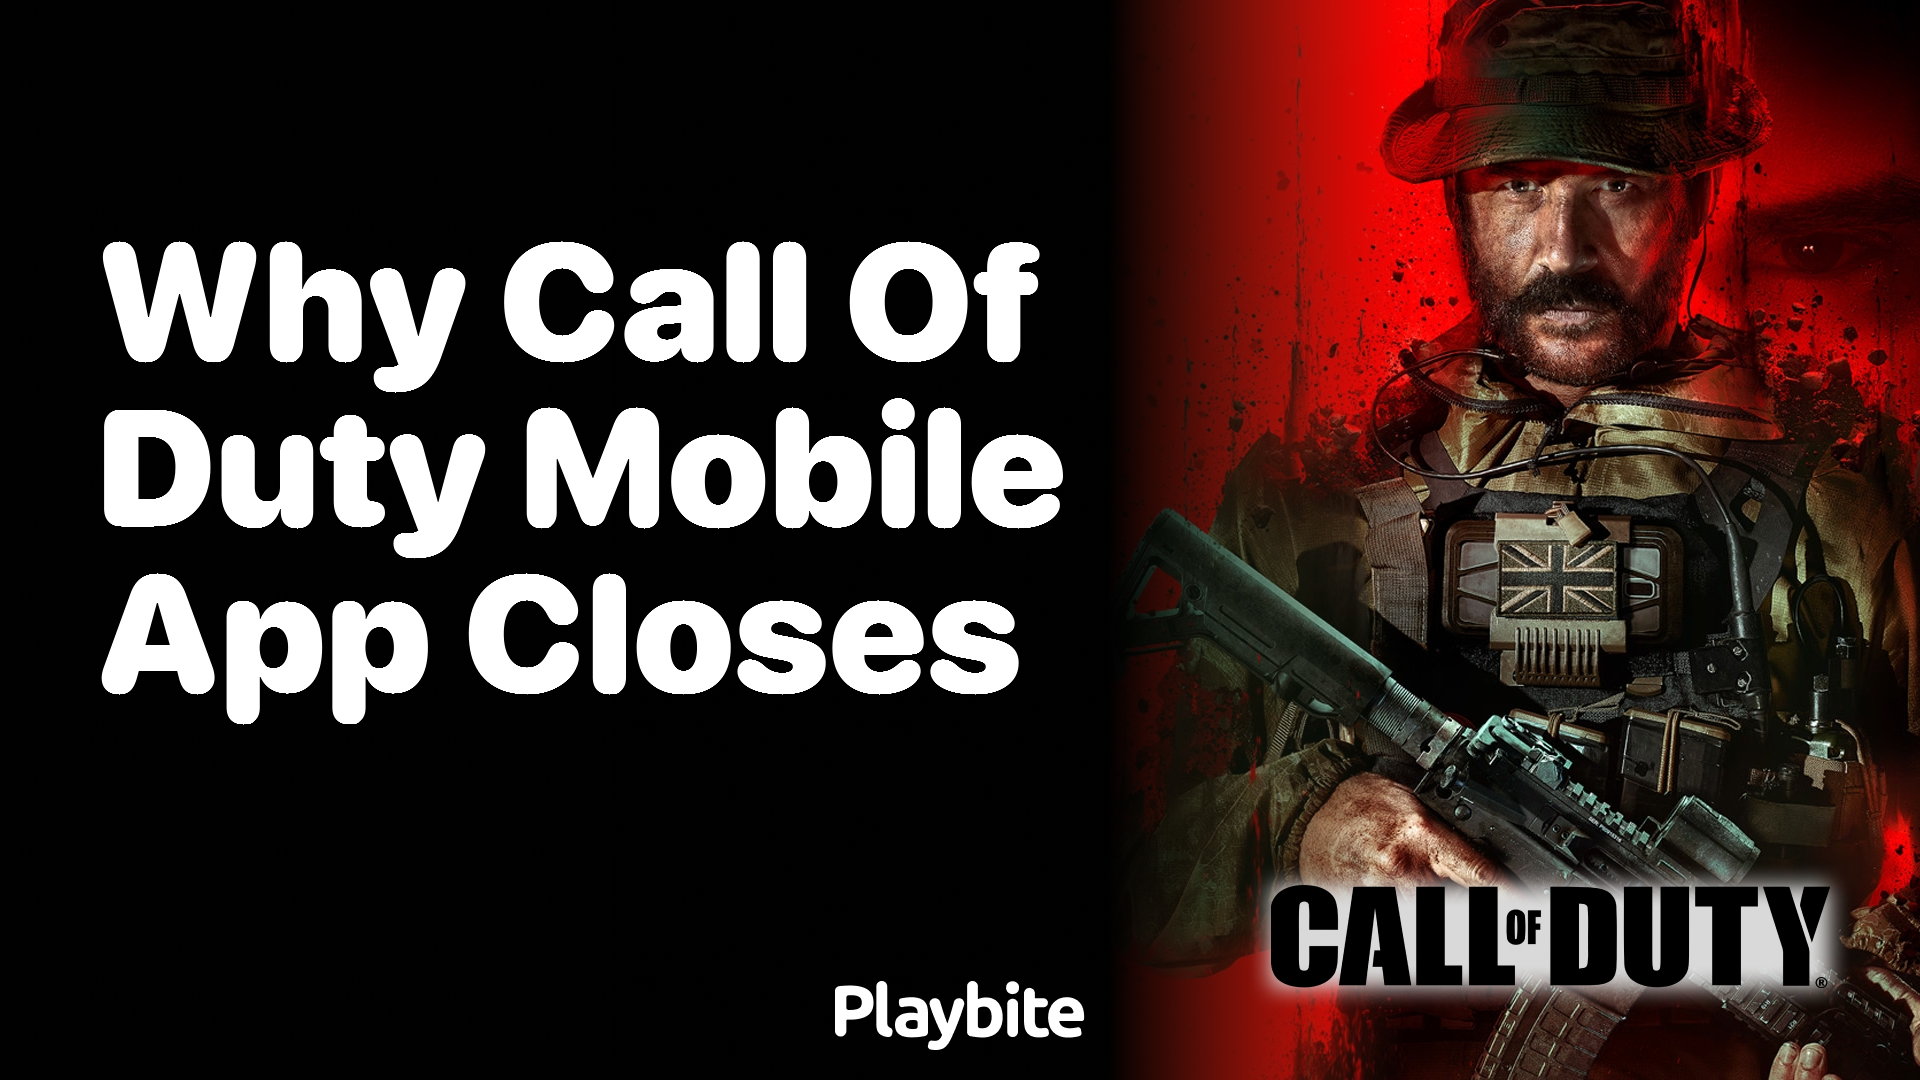 Why Does the Call of Duty Mobile App Close Unexpectedly? Find Out Now!